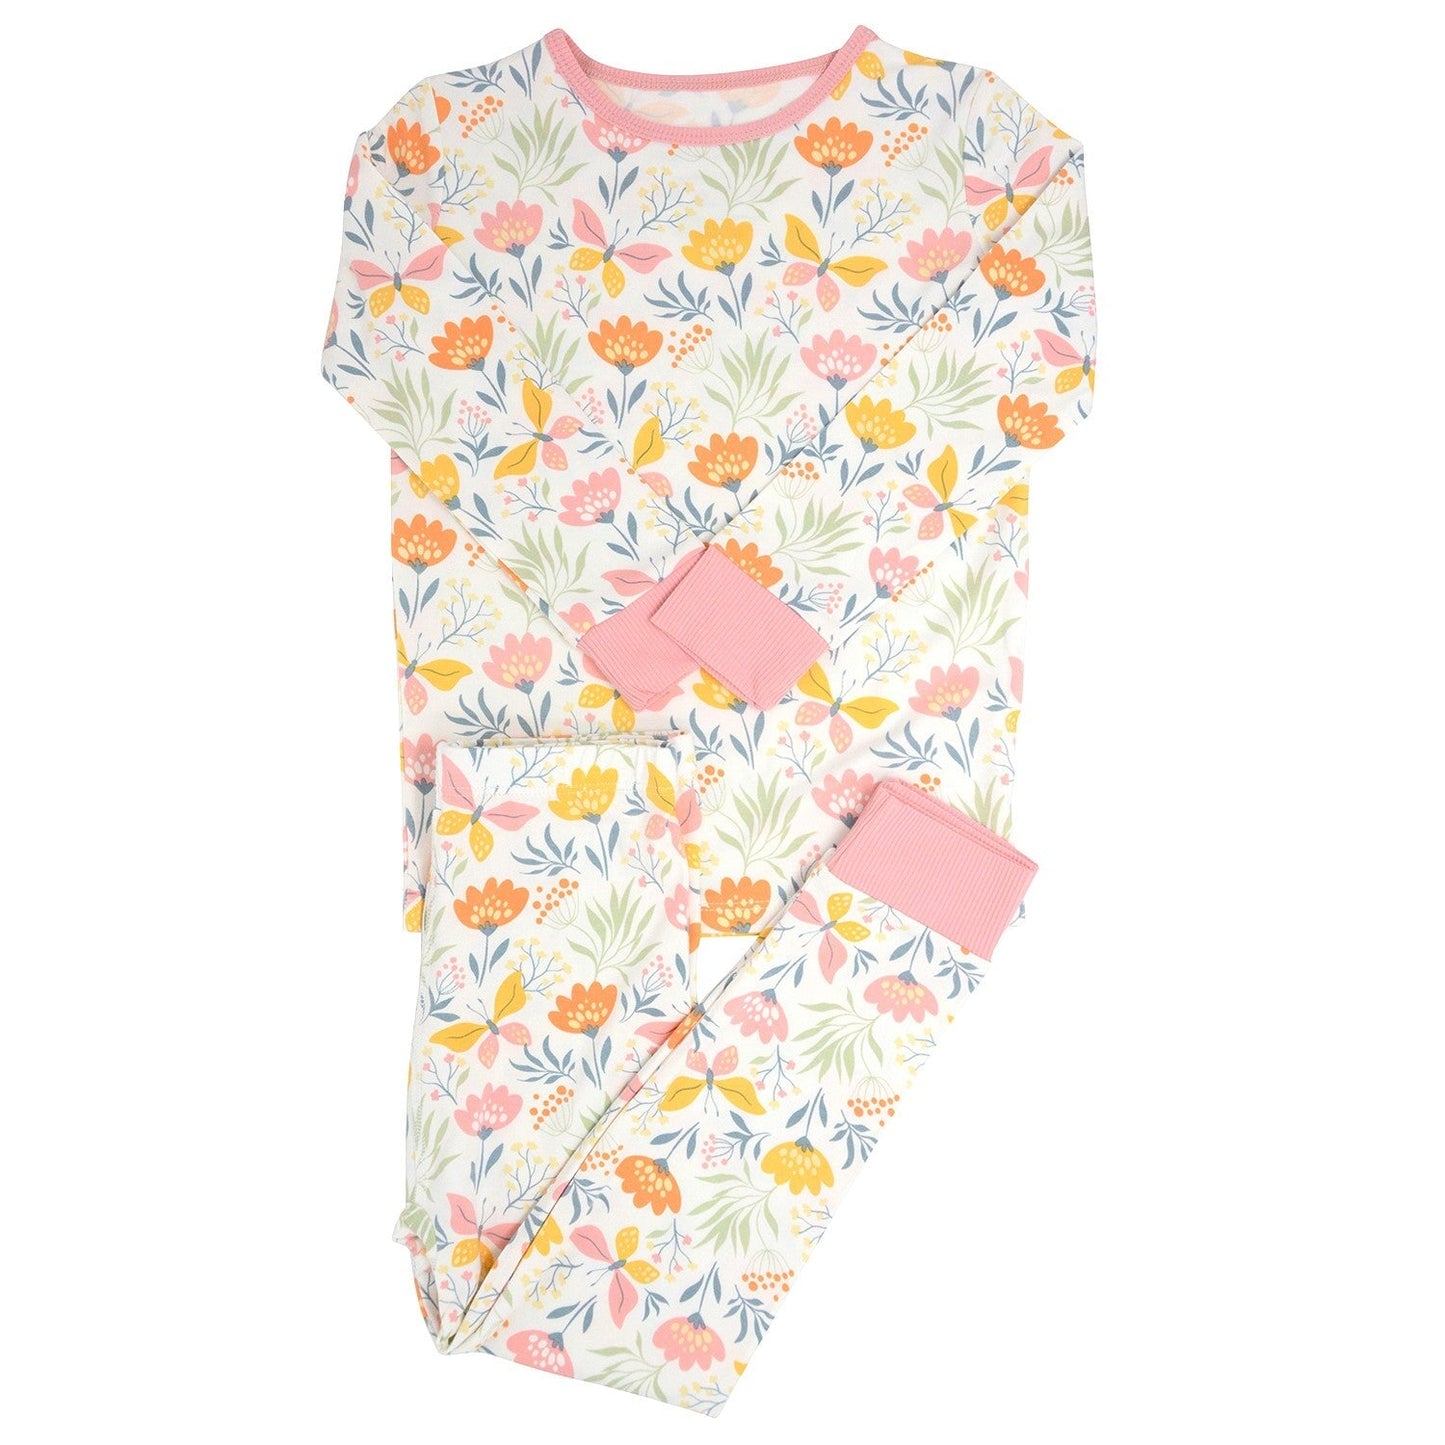 Big Kid Pajama - Butterfly Floral